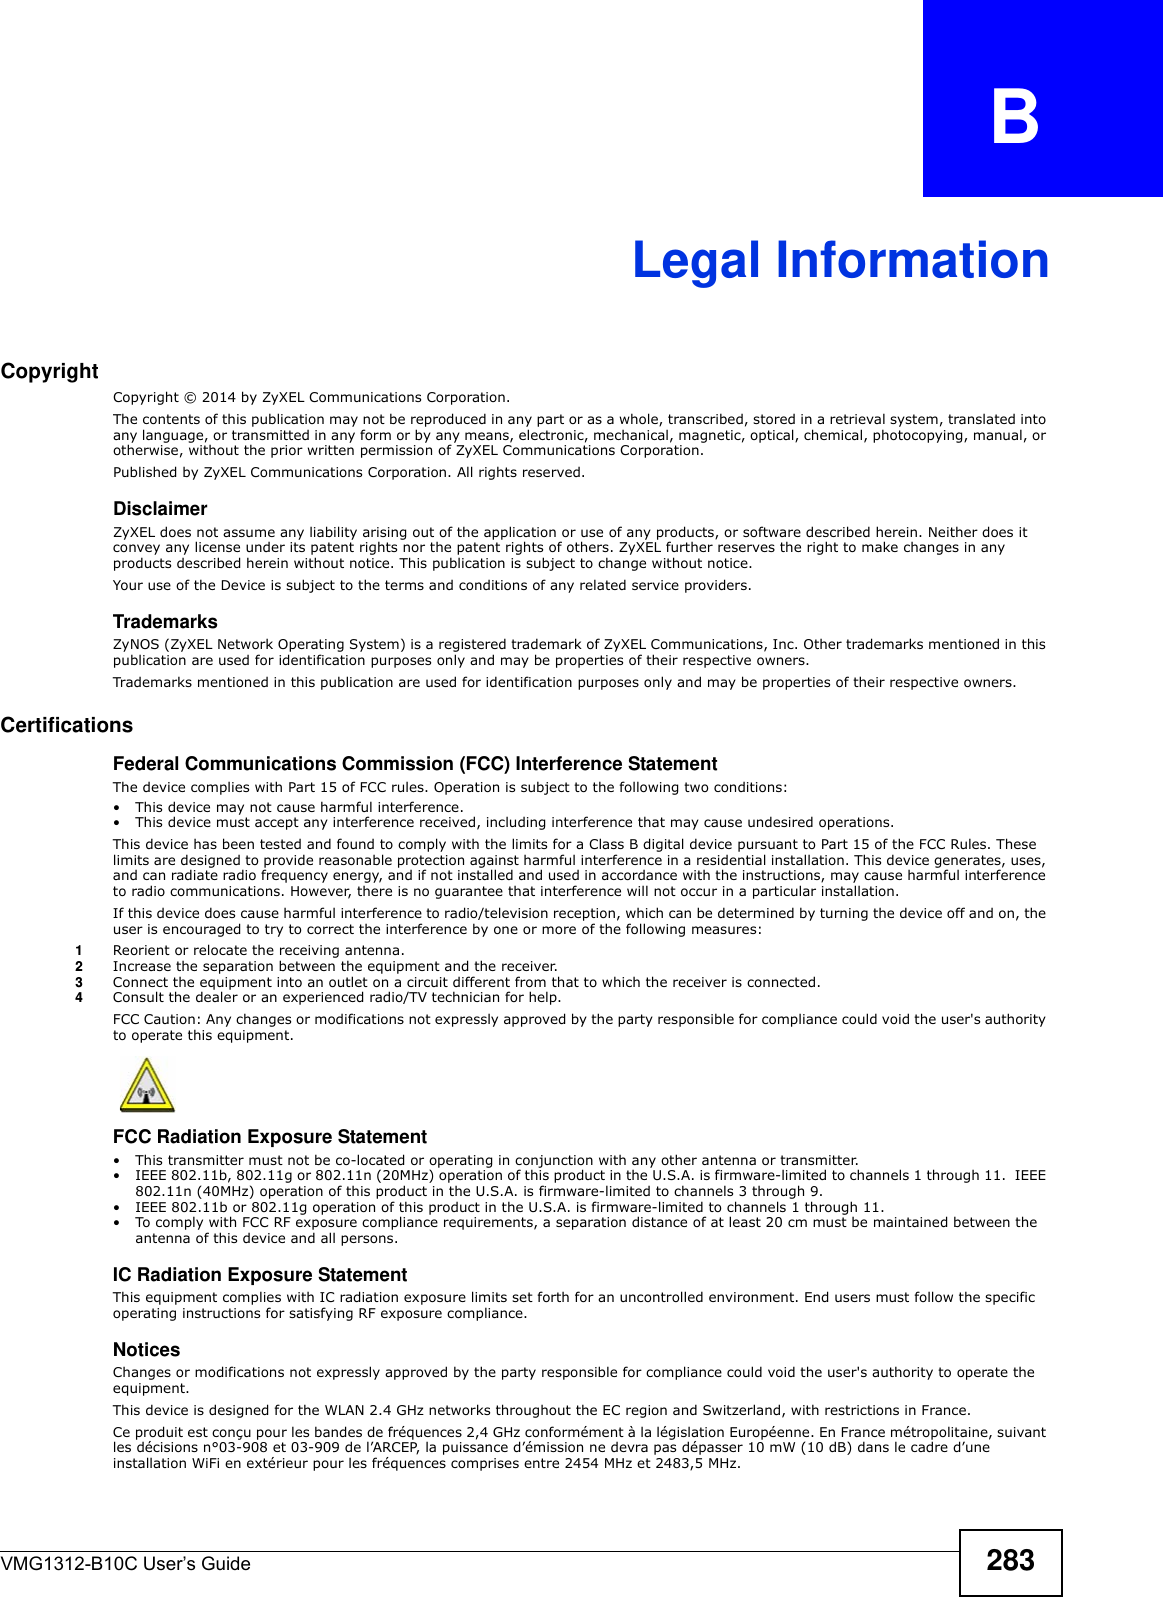 VMG1312-B10C User’s Guide 283APPENDIX   BLegal InformationCopyrightCopyright © 2014 by ZyXEL Communications Corporation.The contents of this publication may not be reproduced in any part or as a whole, transcribed, stored in a retrieval system, translated into any language, or transmitted in any form or by any means, electronic, mechanical, magnetic, optical, chemical, photocopying, manual, or otherwise, without the prior written permission of ZyXEL Communications Corporation.Published by ZyXEL Communications Corporation. All rights reserved.DisclaimerZyXEL does not assume any liability arising out of the application or use of any products, or software described herein. Neither does it convey any license under its patent rights nor the patent rights of others. ZyXEL further reserves the right to make changes in any products described herein without notice. This publication is subject to change without notice.Your use of the Device is subject to the terms and conditions of any related service providers.  TrademarksZyNOS (ZyXEL Network Operating System) is a registered trademark of ZyXEL Communications, Inc. Other trademarks mentioned in this publication are used for identification purposes only and may be properties of their respective owners. Trademarks mentioned in this publication are used for identification purposes only and may be properties of their respective owners. Certifications  Federal Communications Commission (FCC) Interference Statement The device complies with Part 15 of FCC rules. Operation is subject to the following two conditions:• This device may not cause harmful interference.• This device must accept any interference received, including interference that may cause undesired operations.This device has been tested and found to comply with the limits for a Class B digital device pursuant to Part 15 of the FCC Rules. These limits are designed to provide reasonable protection against harmful interference in a residential installation. This device generates, uses, and can radiate radio frequency energy, and if not installed and used in accordance with the instructions, may cause harmful interference to radio communications. However, there is no guarantee that interference will not occur in a particular installation.If this device does cause harmful interference to radio/television reception, which can be determined by turning the device off and on, the user is encouraged to try to correct the interference by one or more of the following measures:1Reorient or relocate the receiving antenna.2Increase the separation between the equipment and the receiver.3Connect the equipment into an outlet on a circuit different from that to which the receiver is connected.4Consult the dealer or an experienced radio/TV technician for help.FCC Caution: Any changes or modifications not expressly approved by the party responsible for compliance could void the user&apos;s authority to operate this equipment.FCC Radiation Exposure Statement • This transmitter must not be co-located or operating in conjunction with any other antenna or transmitter. • IEEE 802.11b, 802.11g or 802.11n (20MHz) operation of this product in the U.S.A. is firmware-limited to channels 1 through 11.  IEEE 802.11n (40MHz) operation of this product in the U.S.A. is firmware-limited to channels 3 through 9. • IEEE 802.11b or 802.11g operation of this product in the U.S.A. is firmware-limited to channels 1 through 11. • To comply with FCC RF exposure compliance requirements, a separation distance of at least 20 cm must be maintained between the antenna of this device and all persons. IC Radiation Exposure Statement This equipment complies with IC radiation exposure limits set forth for an uncontrolled environment. End users must follow the specific operating instructions for satisfying RF exposure compliance.Notices Changes or modifications not expressly approved by the party responsible for compliance could void the user&apos;s authority to operate the equipment.This device is designed for the WLAN 2.4 GHz networks throughout the EC region and Switzerland, with restrictions in France.Ce produit est conçu pour les bandes de fréquences 2,4 GHz conformément à la législation Européenne. En France métropolitaine, suivant les décisions n°03-908 et 03-909 de l’ARCEP, la puissance d’émission ne devra pas dépasser 10 mW (10 dB) dans le cadre d’une installation WiFi en extérieur pour les fréquences comprises entre 2454 MHz et 2483,5 MHz. 